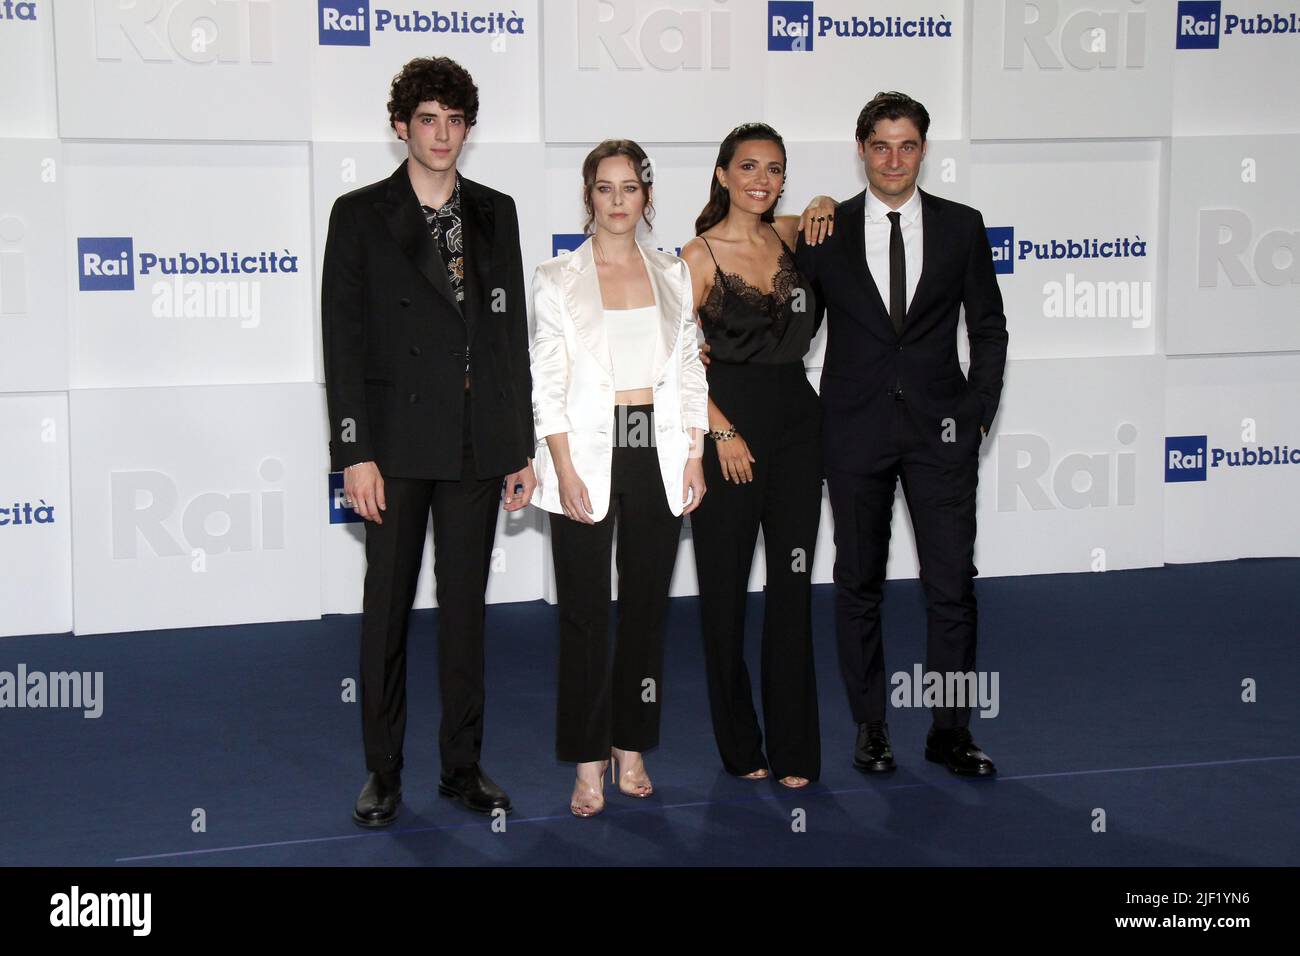 Milan, Italy. 28th June, 2022. Milan, Rai Schedule presentation. In the photo: Nicolas Maupas, Camilla Semino Favro, Serena Rossi and Lino Guanciale Credit: Independent Photo Agency/Alamy Live News Stock Photo